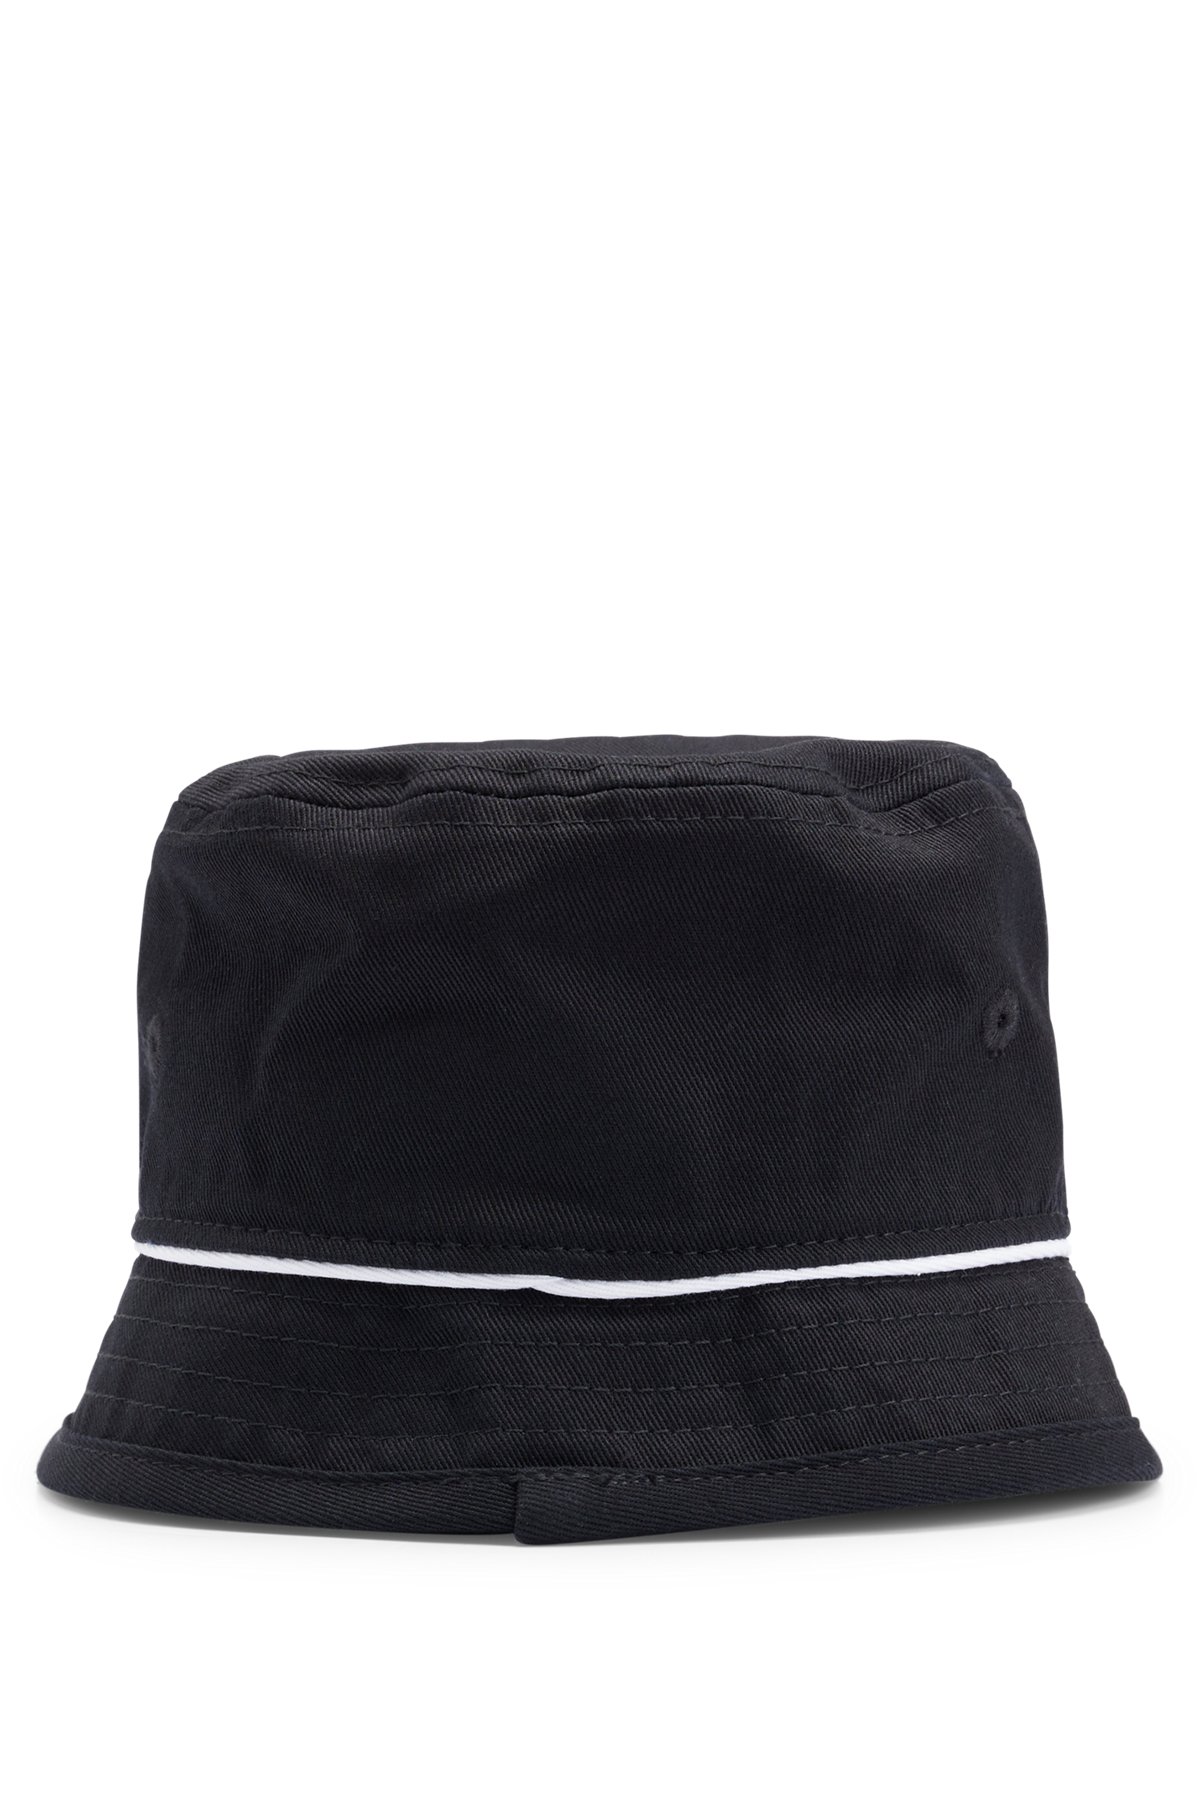 BOSS - Kids' bucket hat in cotton twill with contrast logo